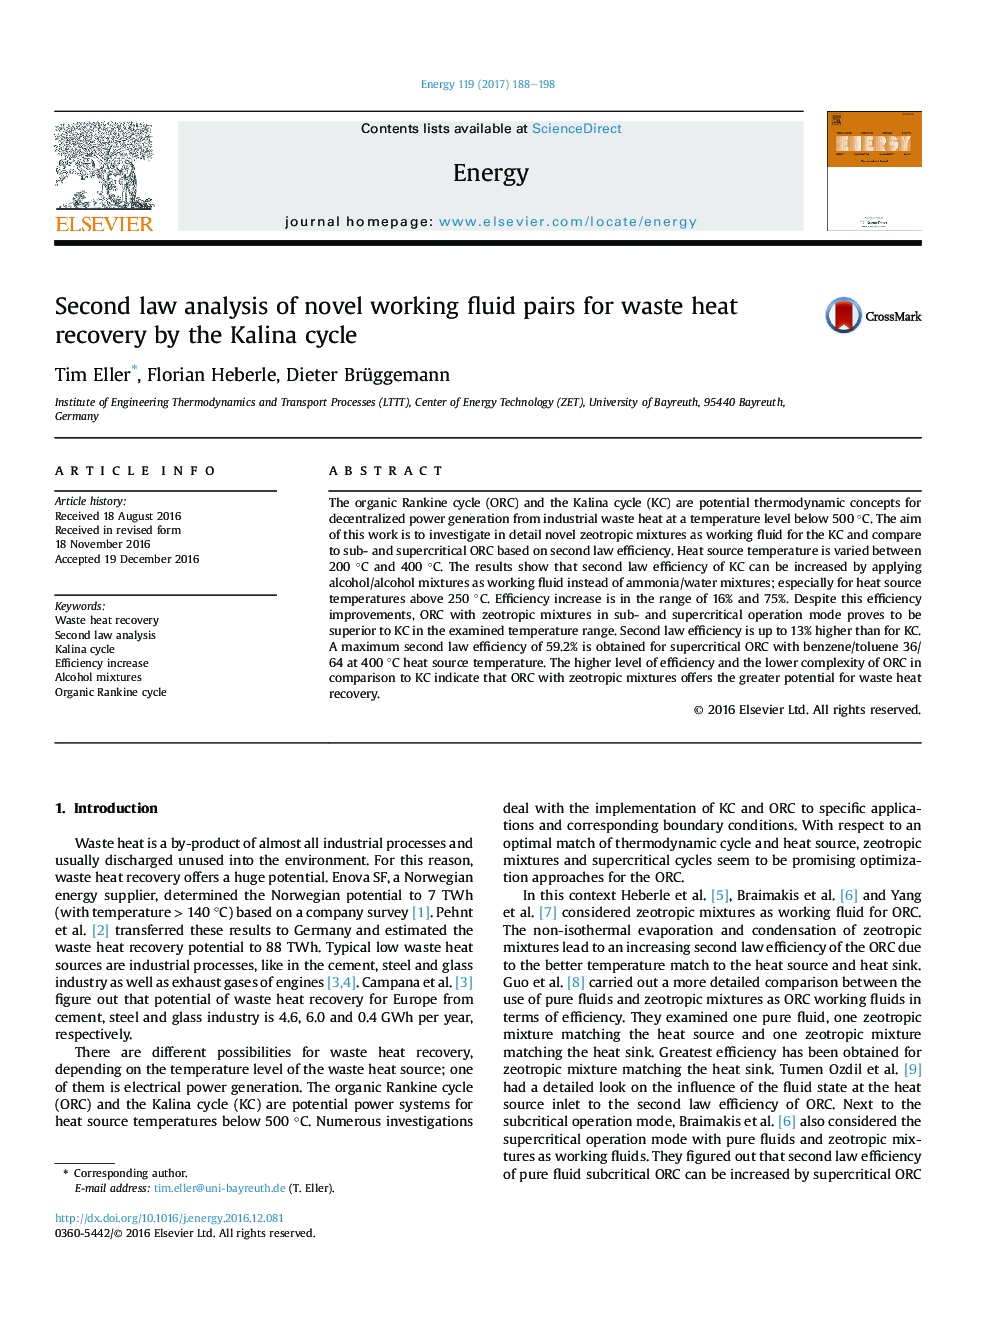 Second law analysis of novel working fluid pairs for waste heat recovery by the Kalina cycle